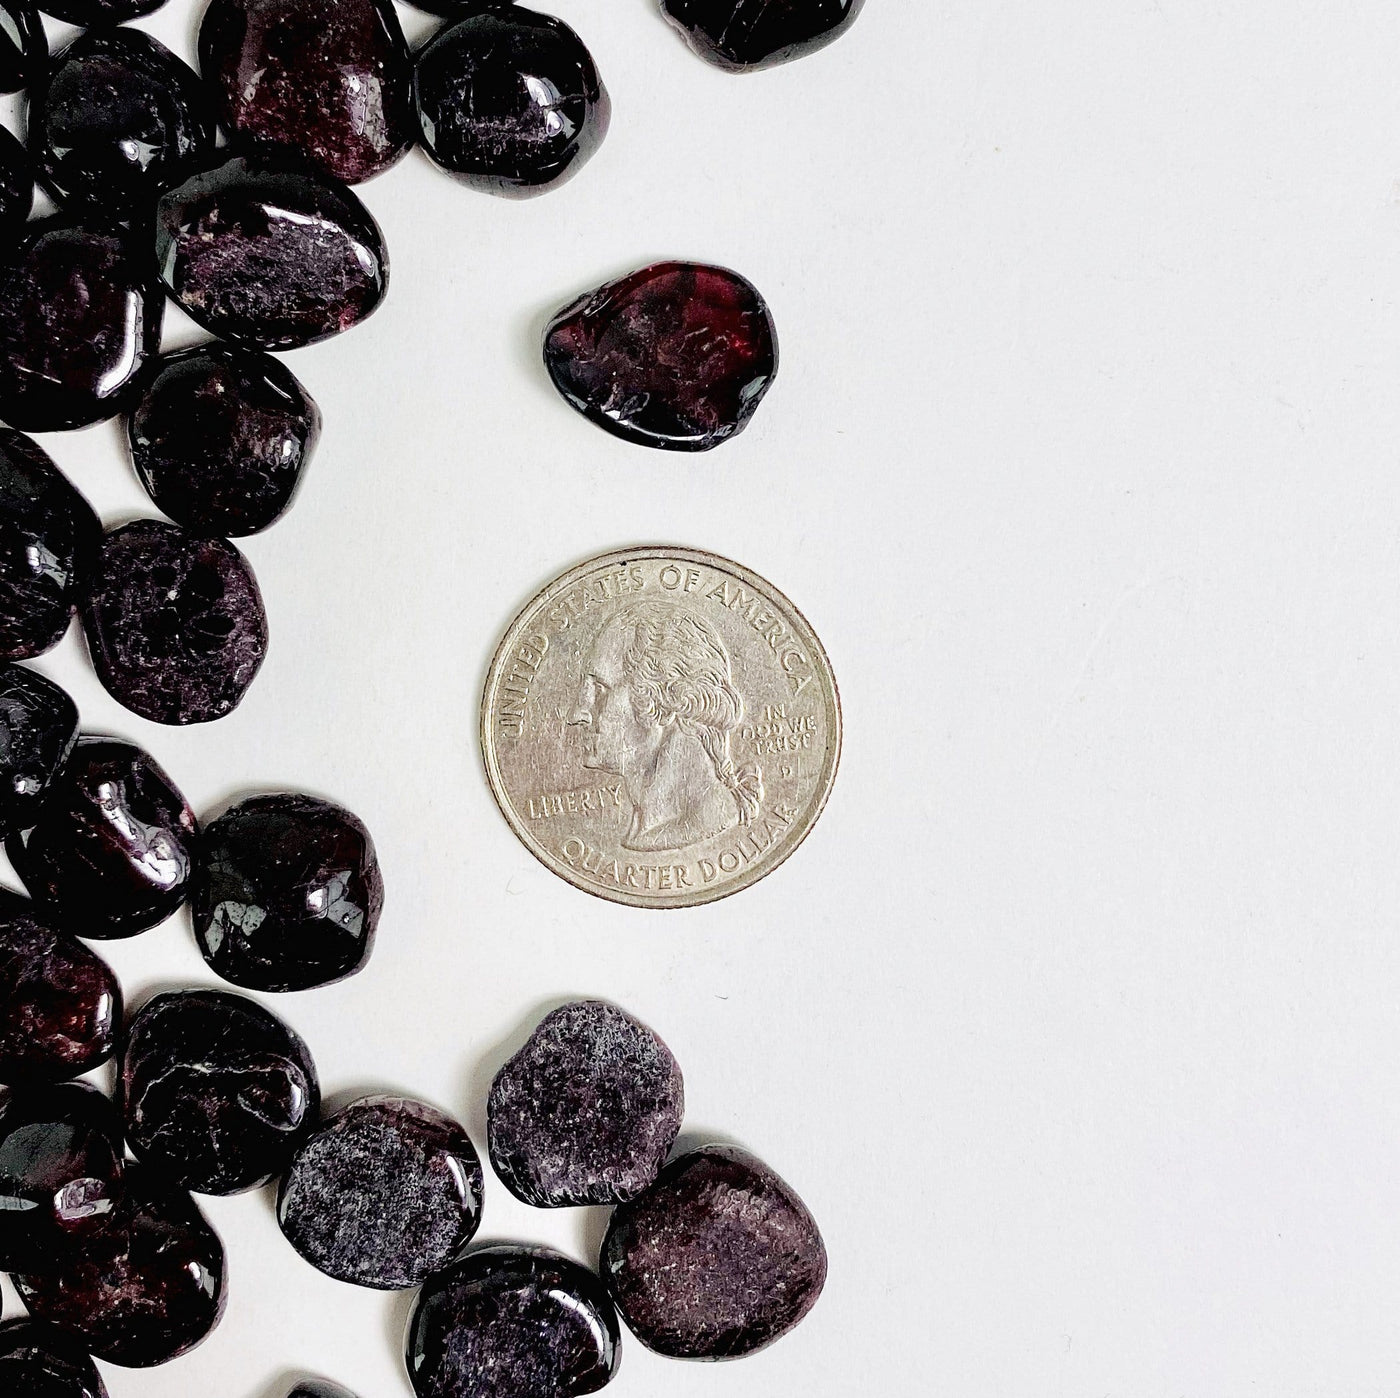 garnet chips next to a quarter for size reference 